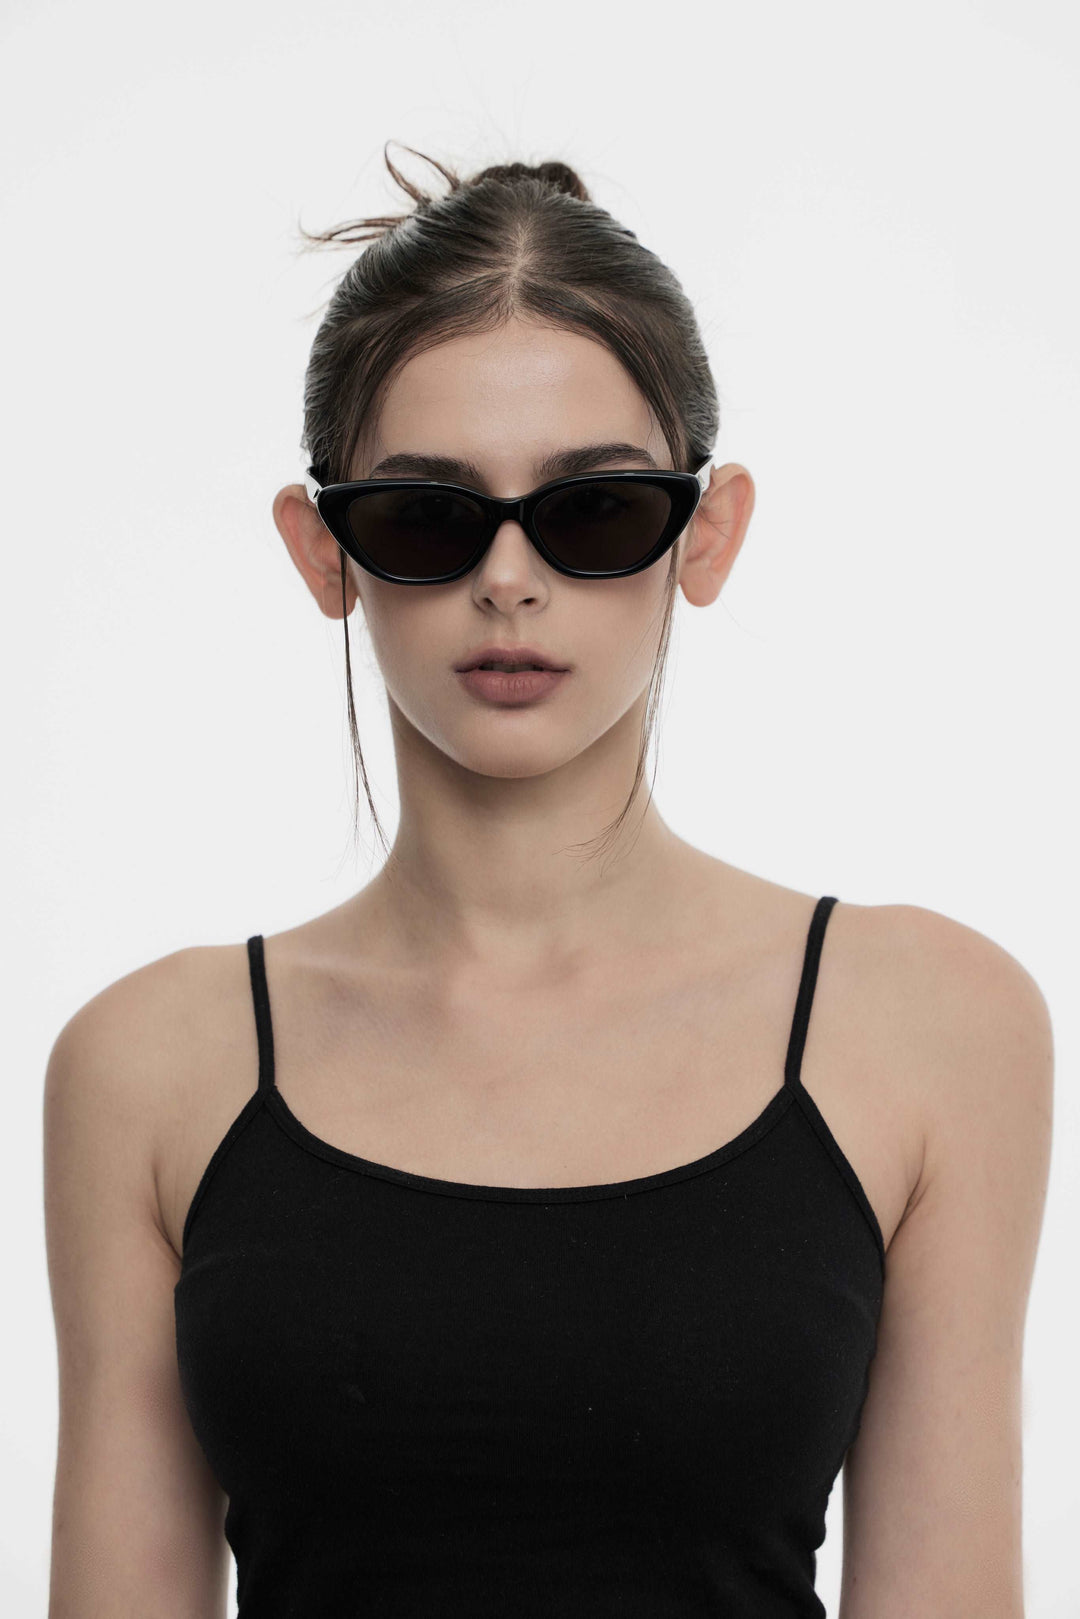 Female Model of her front face wearing Virgo in black cat-eye trendy sunglasses from Mercury Retrograde Galaxy Collection 